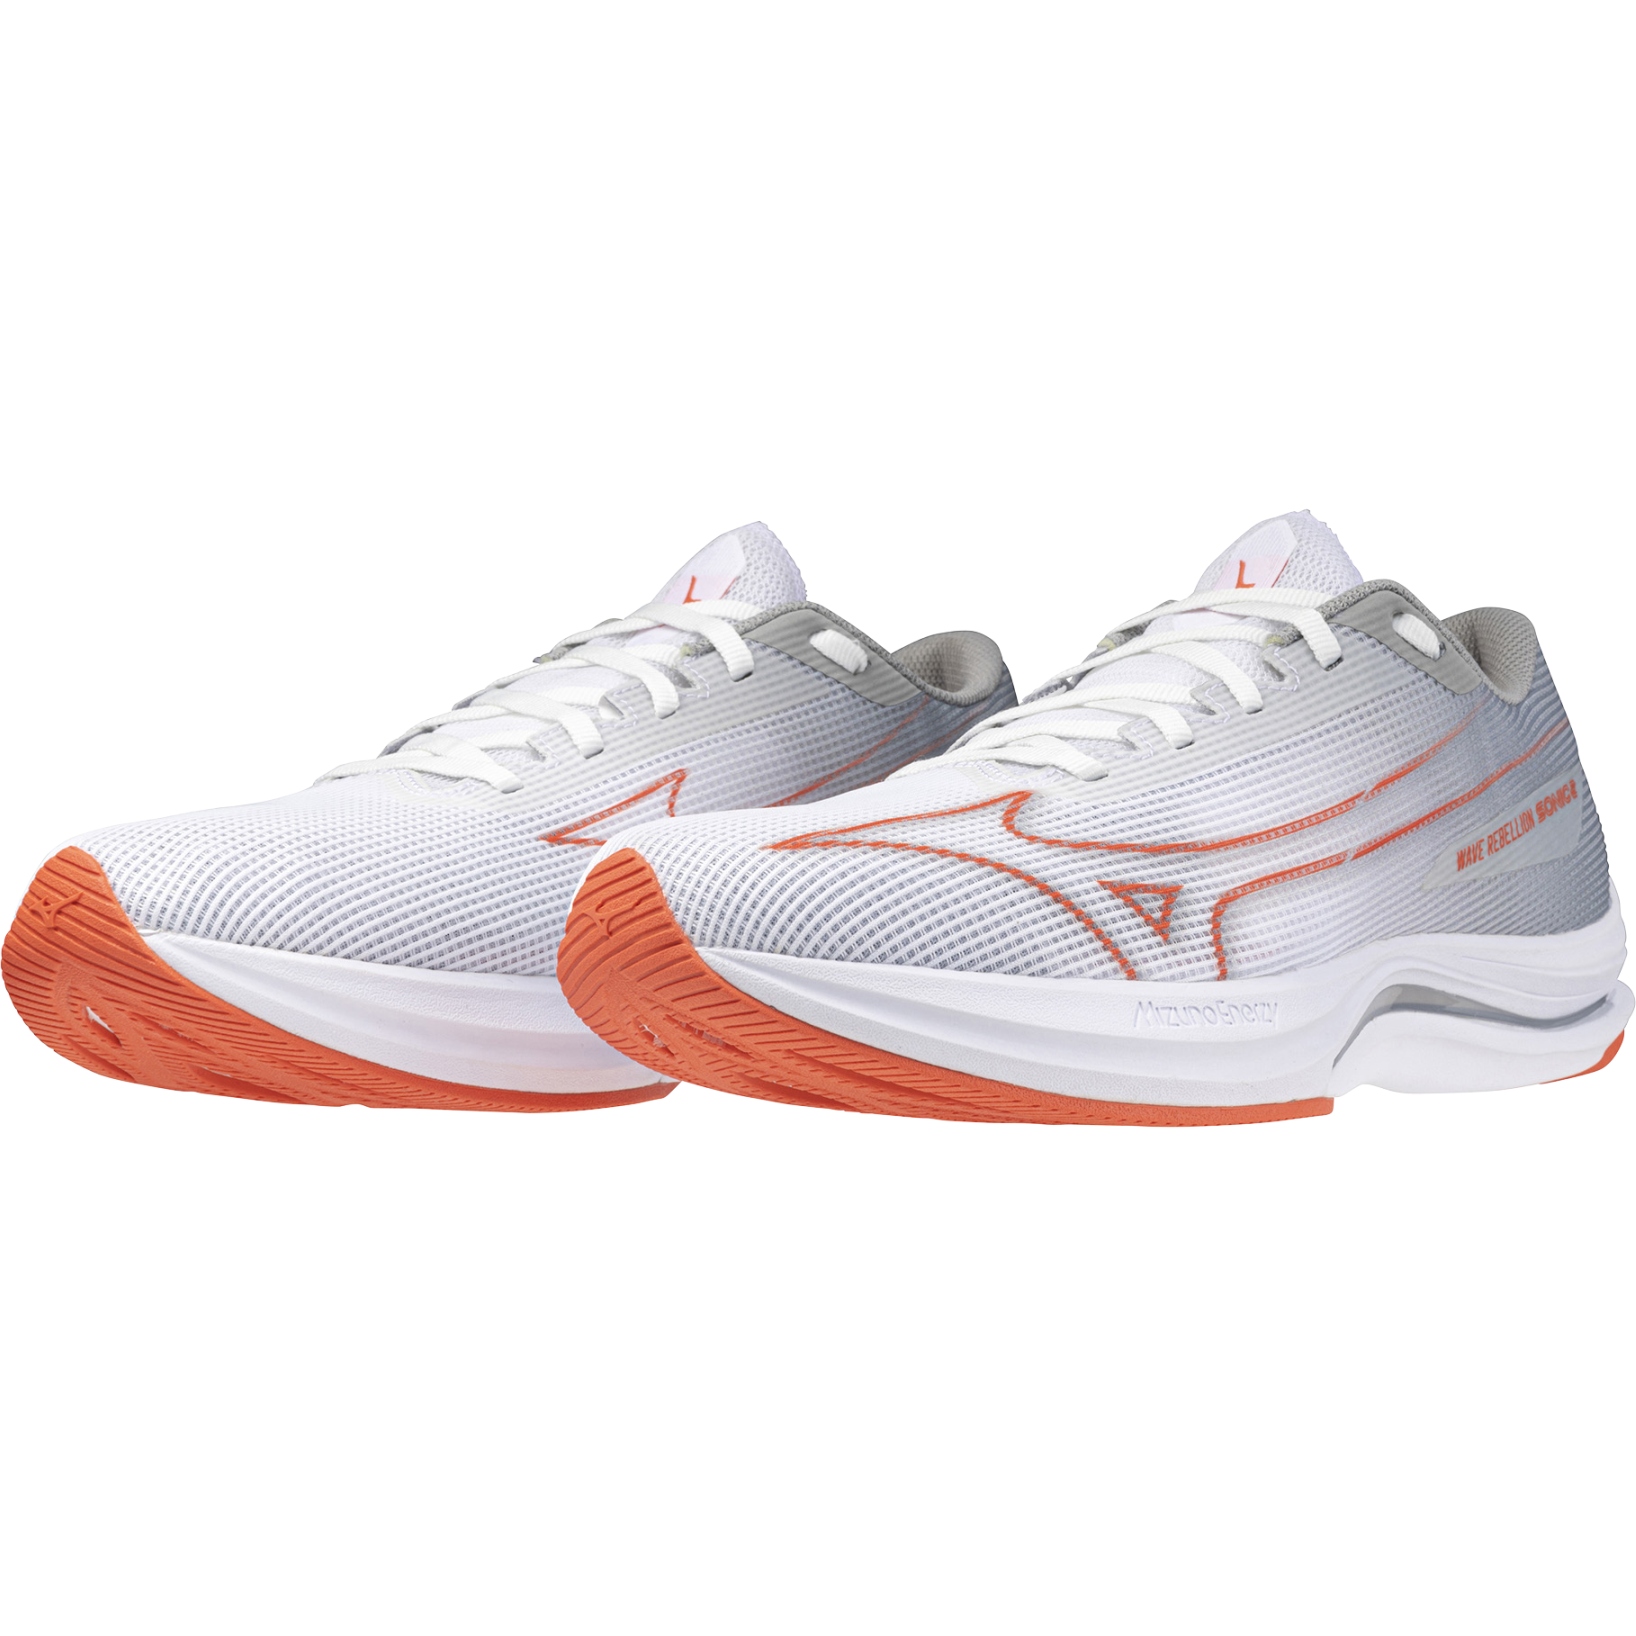 Picture of Mizuno Wave Rebellion Sonic 2 Running Shoes Men - White / Hot Coral / Harbor Mist